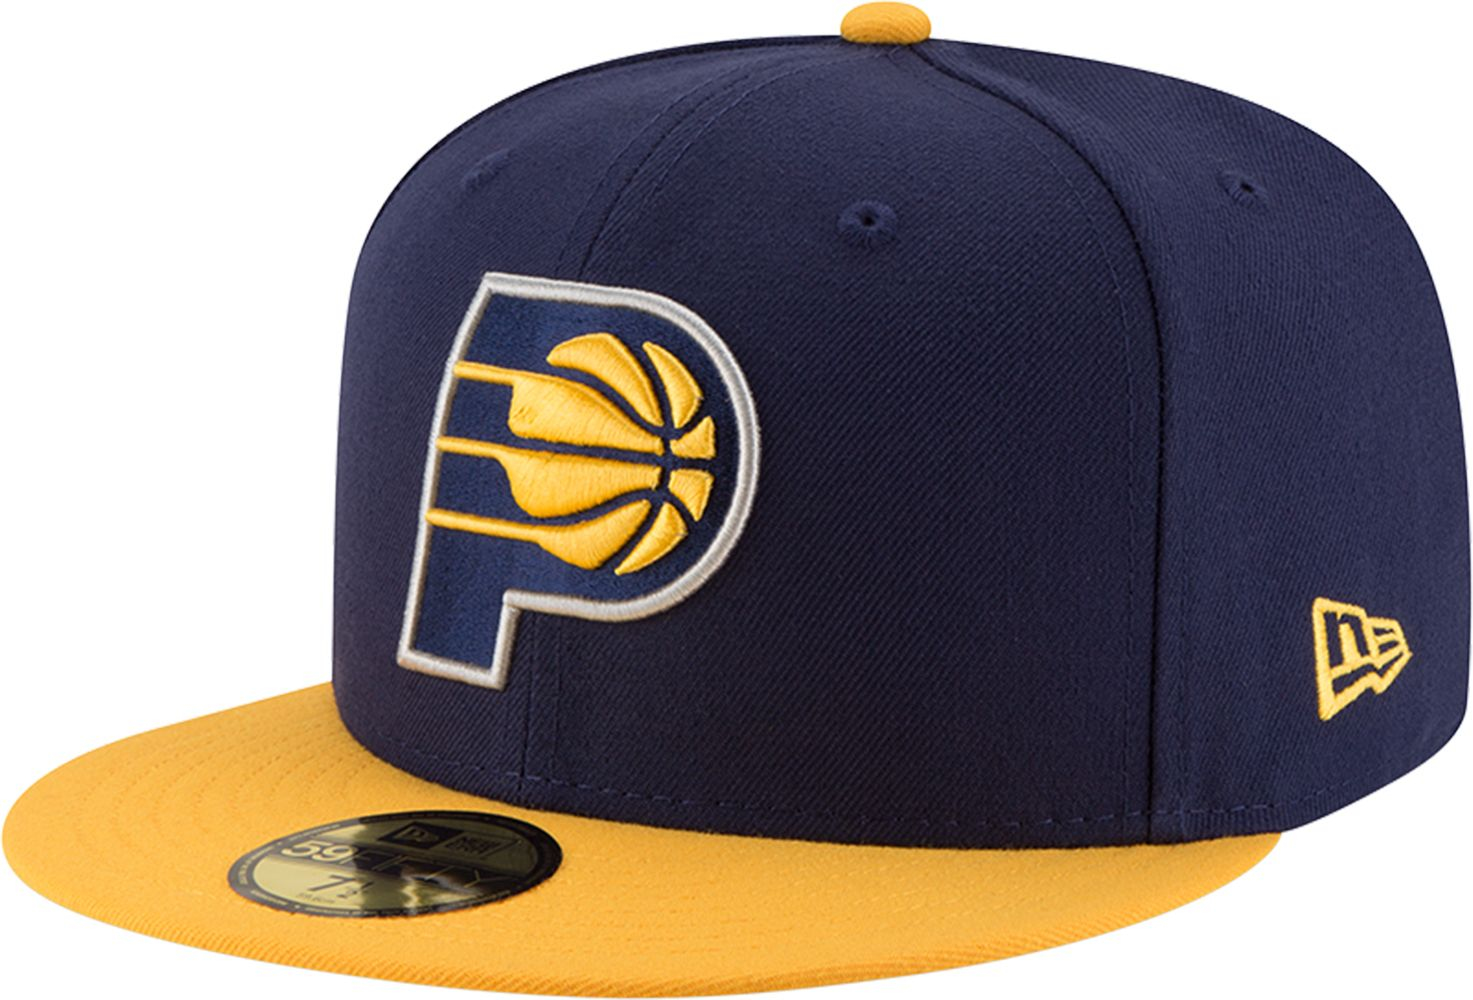 New Era Men's Indiana Pacers 59Fifty Navy/Gold Fitted Hat, Size 7, Team